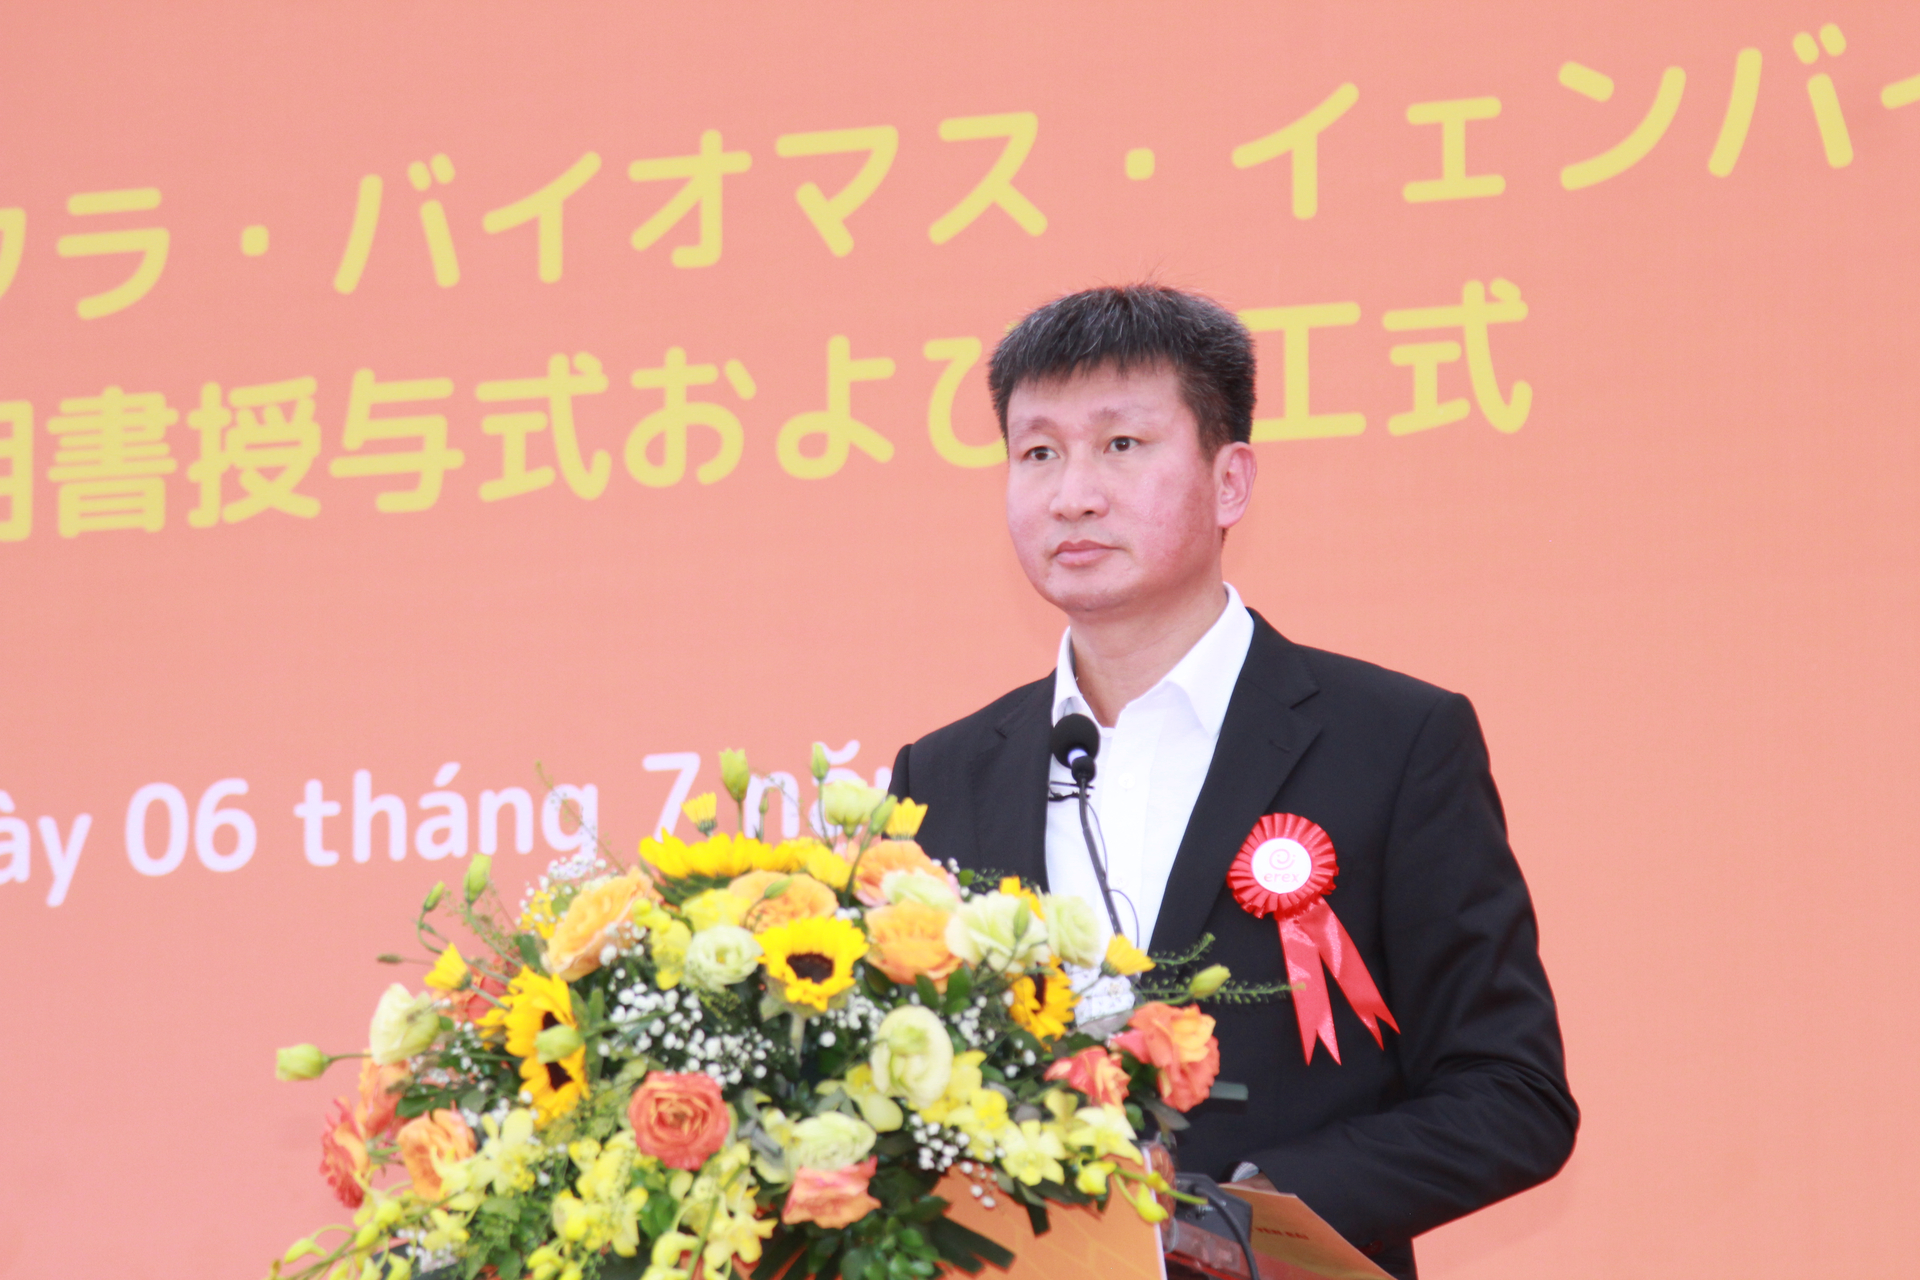 Mr. Tran Huy Tuan - Chairman of Yen Bai Provincial People's Committee spoke at the ceremony. Photo: Thanh Tien.